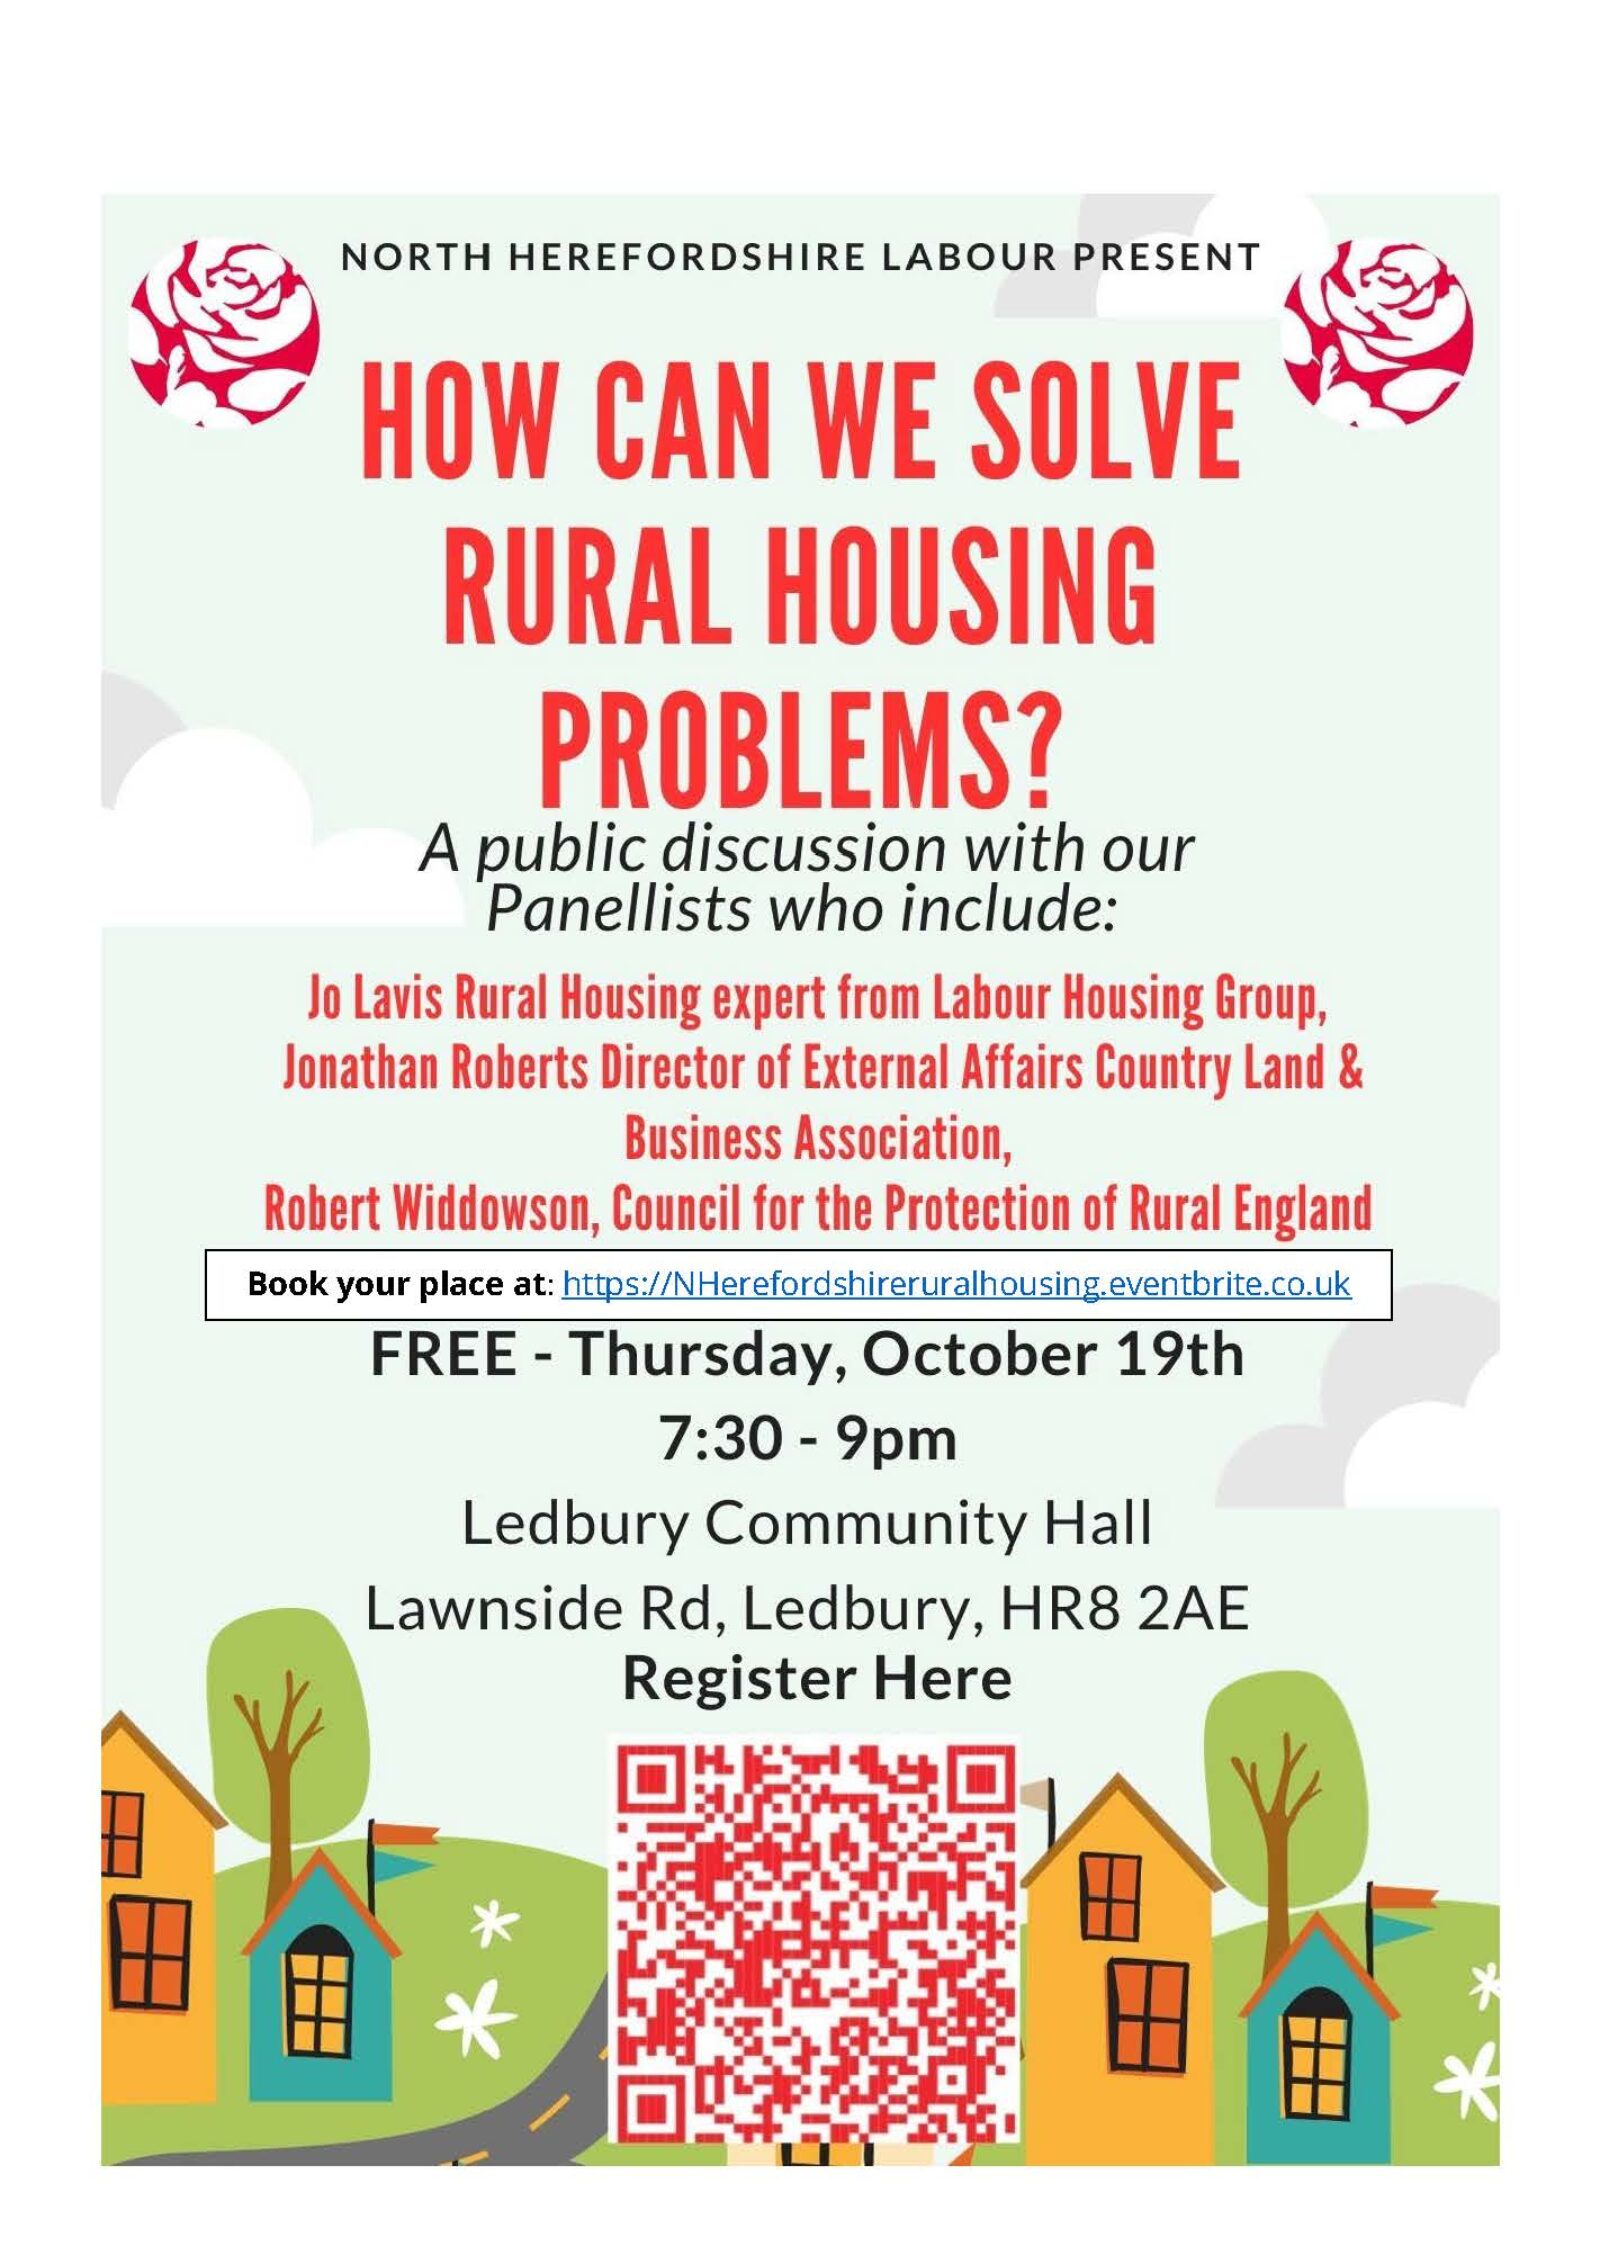 The poster for the rural housing event.